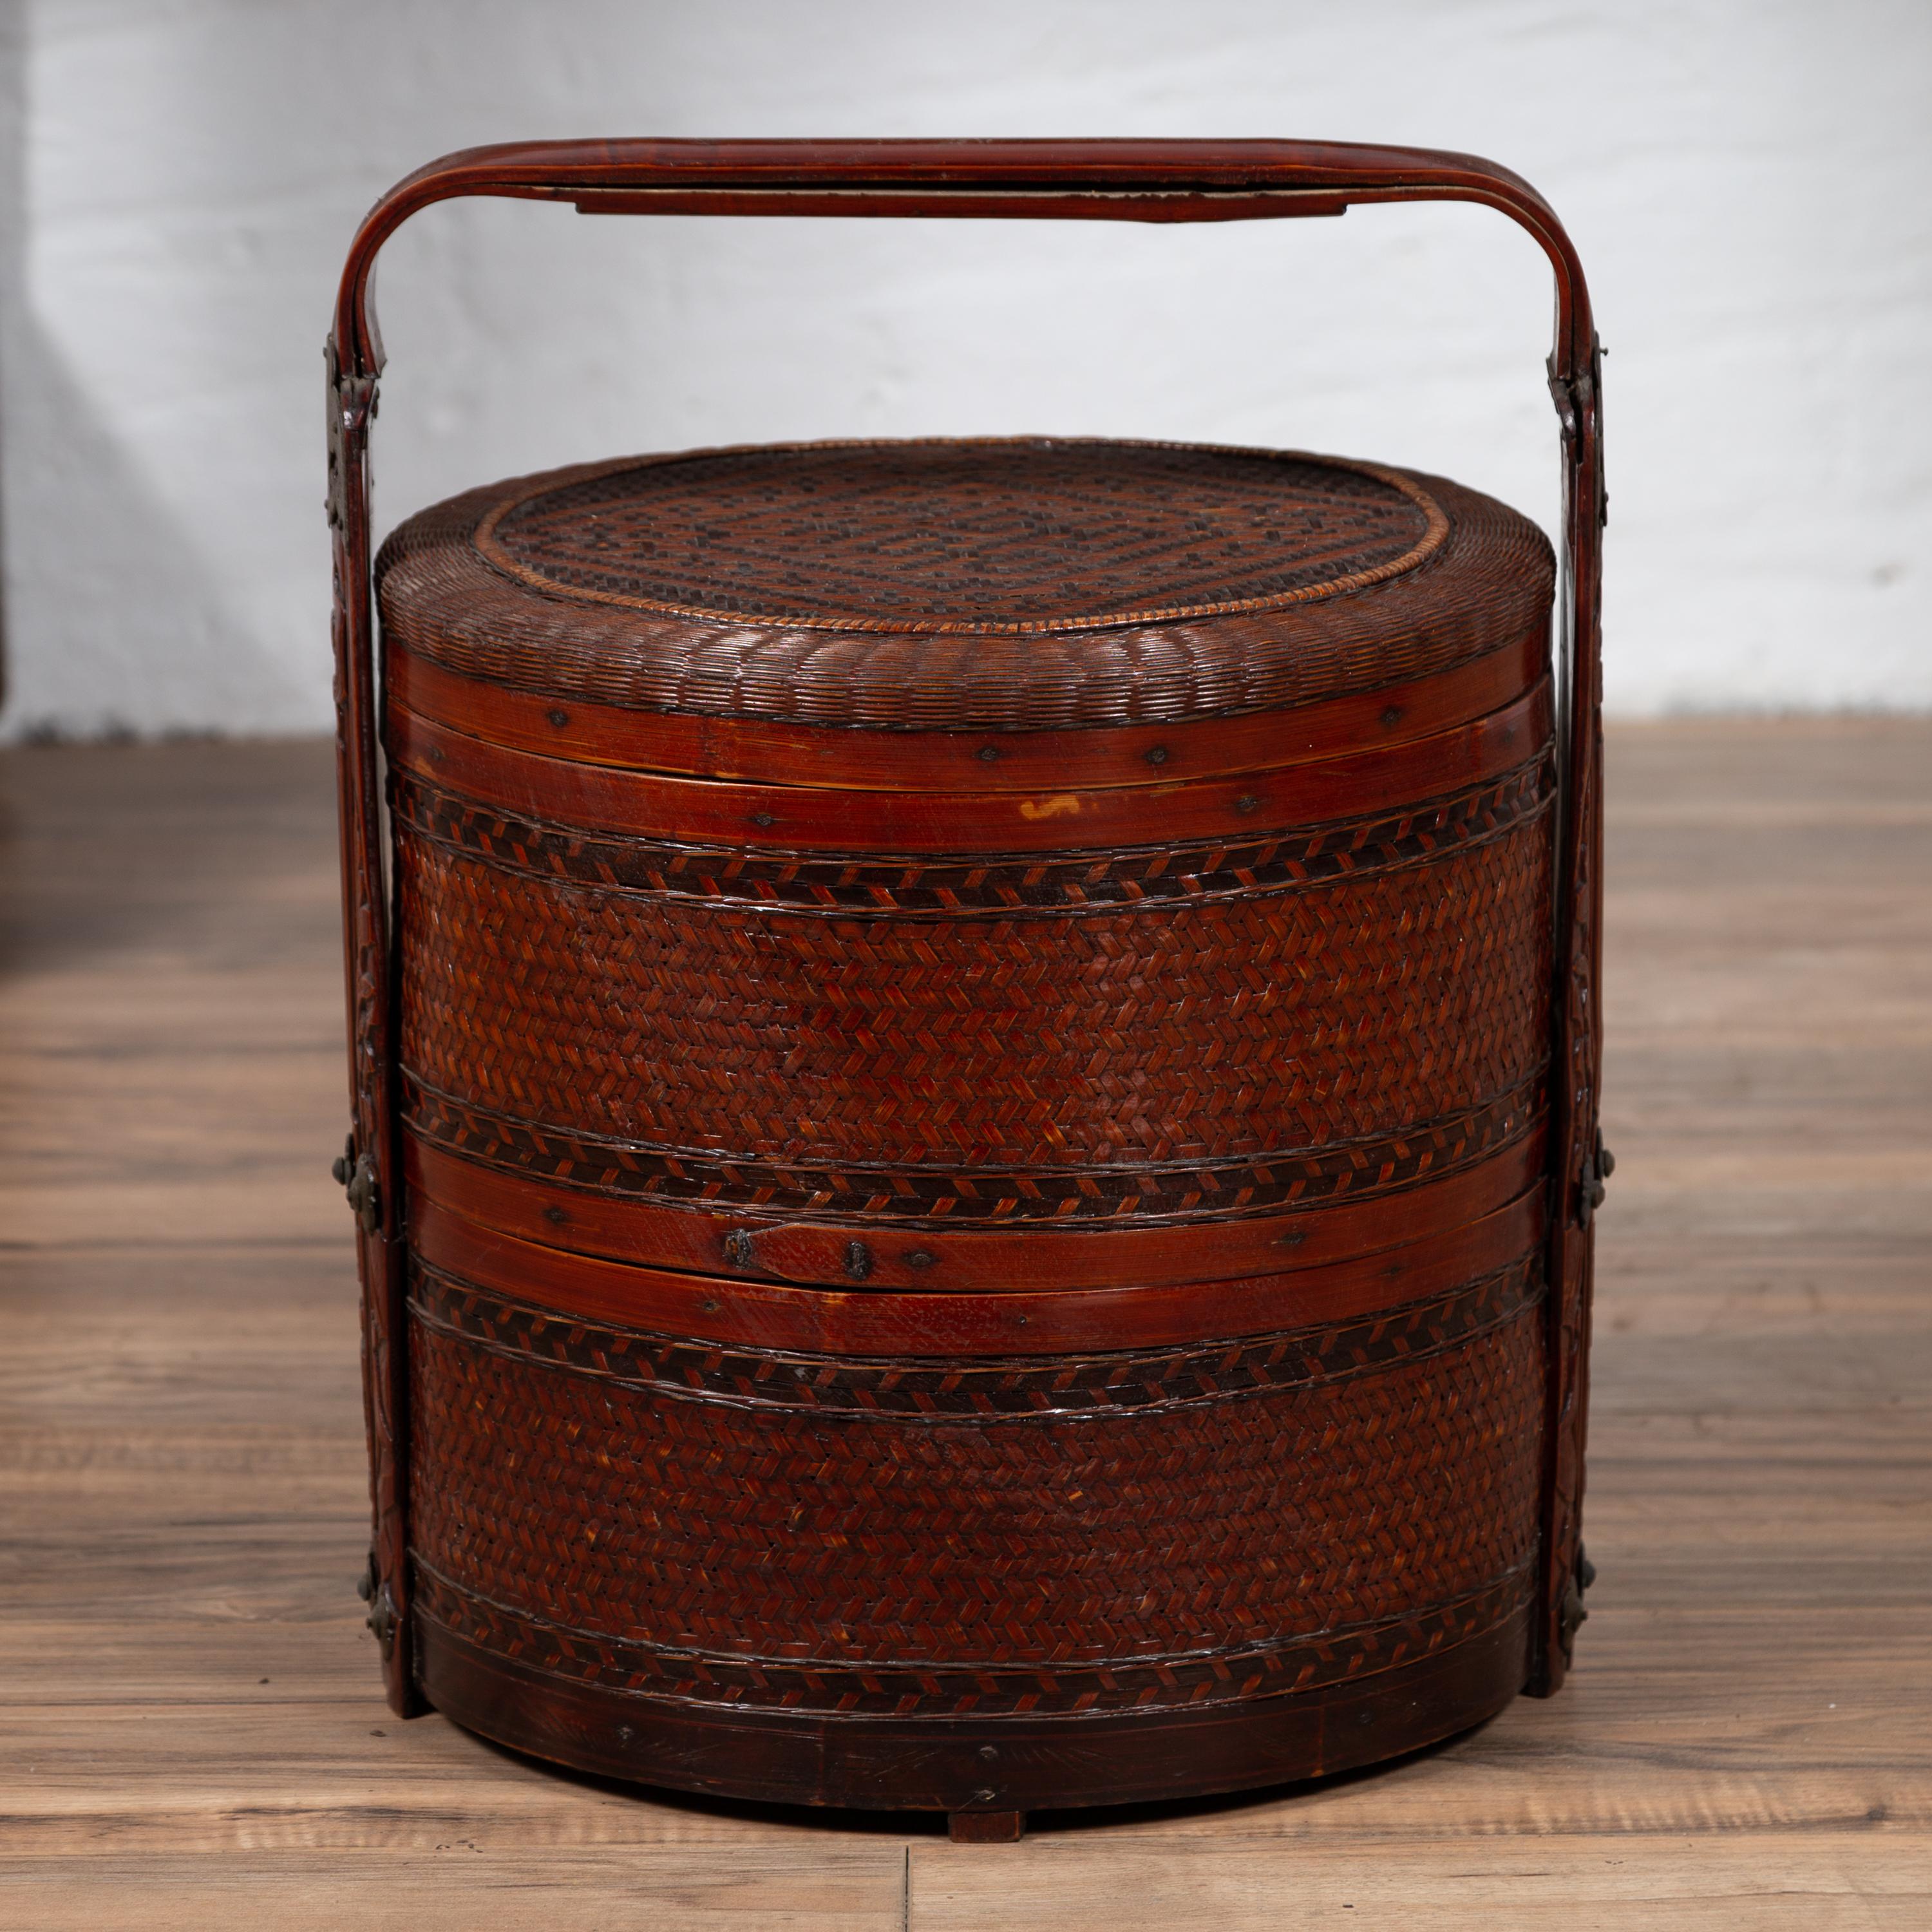 A Chinese vintage rattan two-tiered nested lunch basket from the mid-20th century, with geometrical motifs and handle. Born in China during the midcentury period, this charming lunch basket features a circular lid adorned with woven geometrical